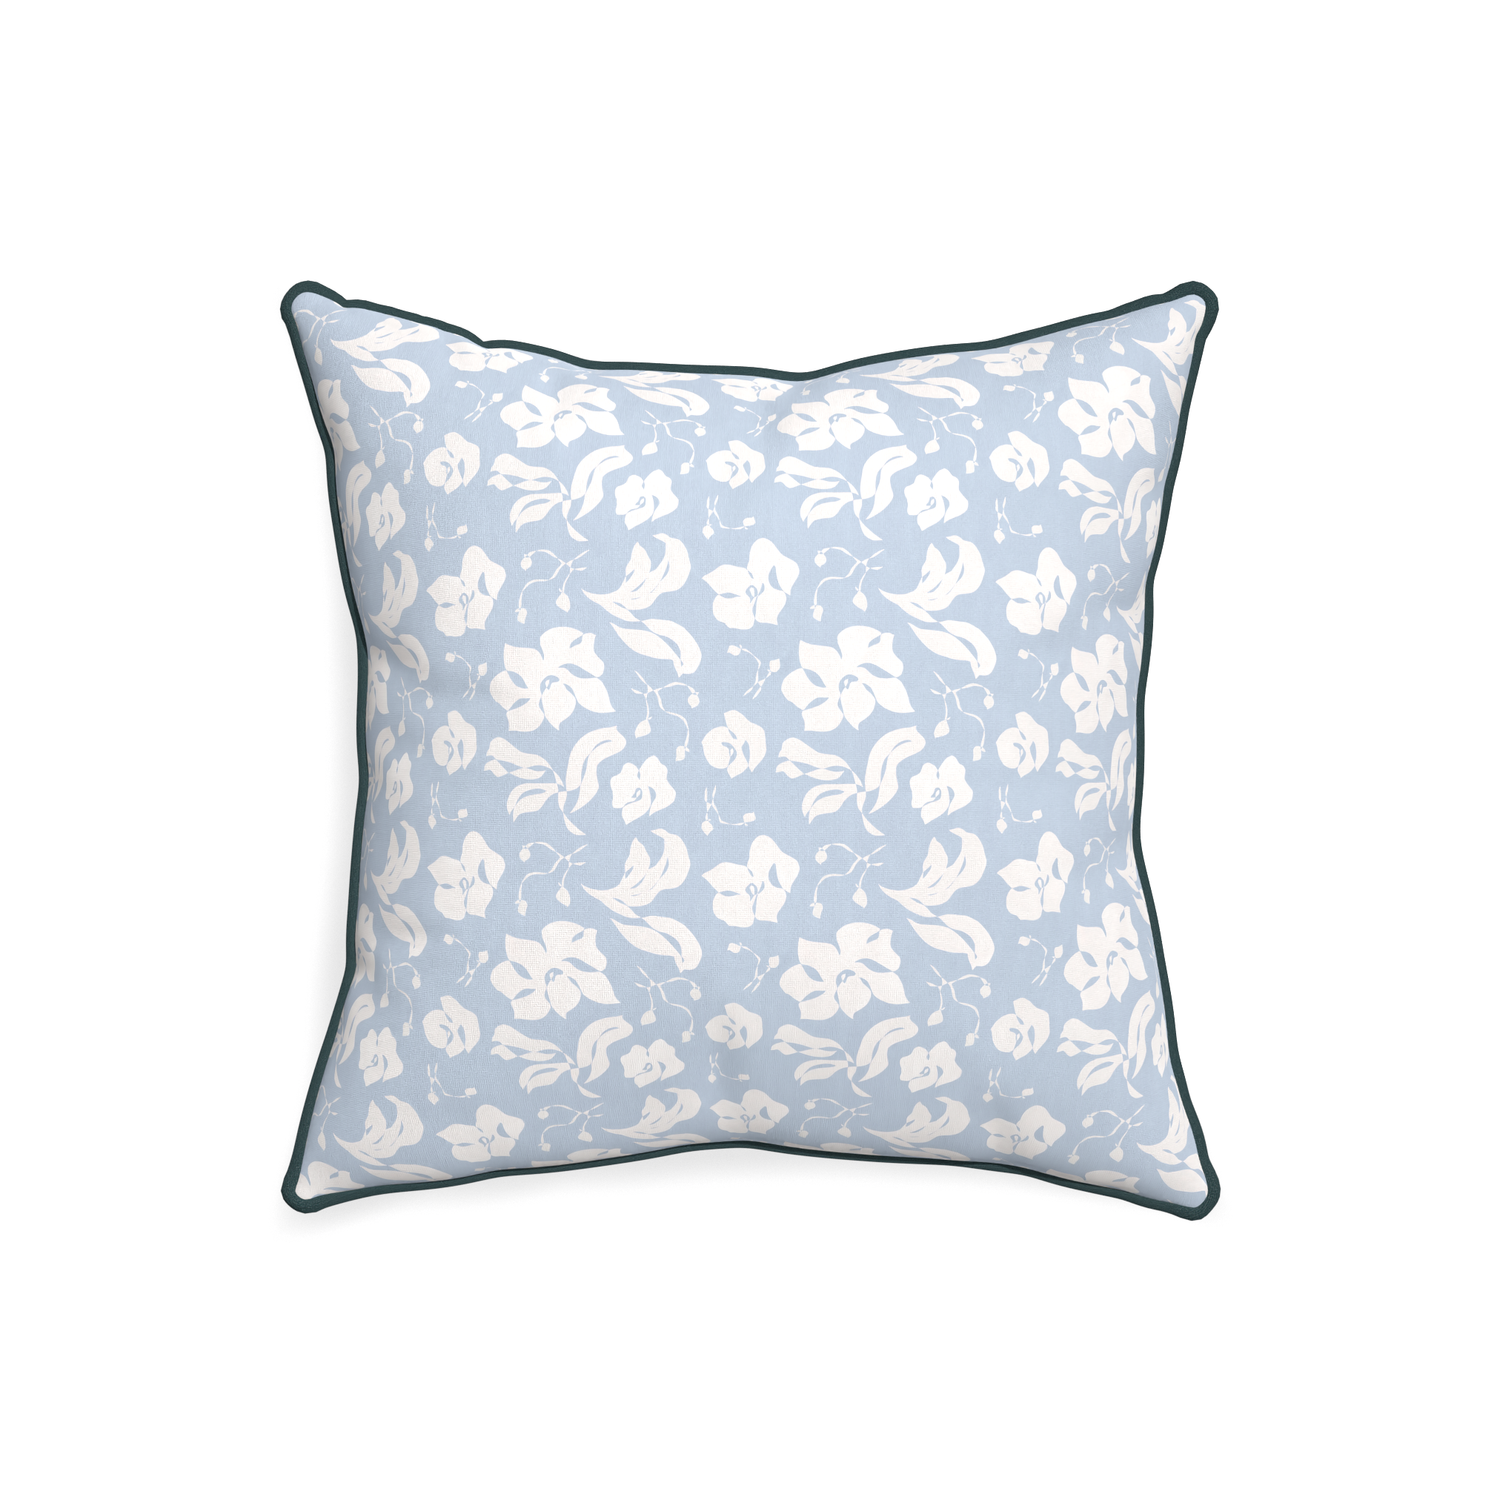 20-square georgia custom cornflower blue floralpillow with p piping on white background